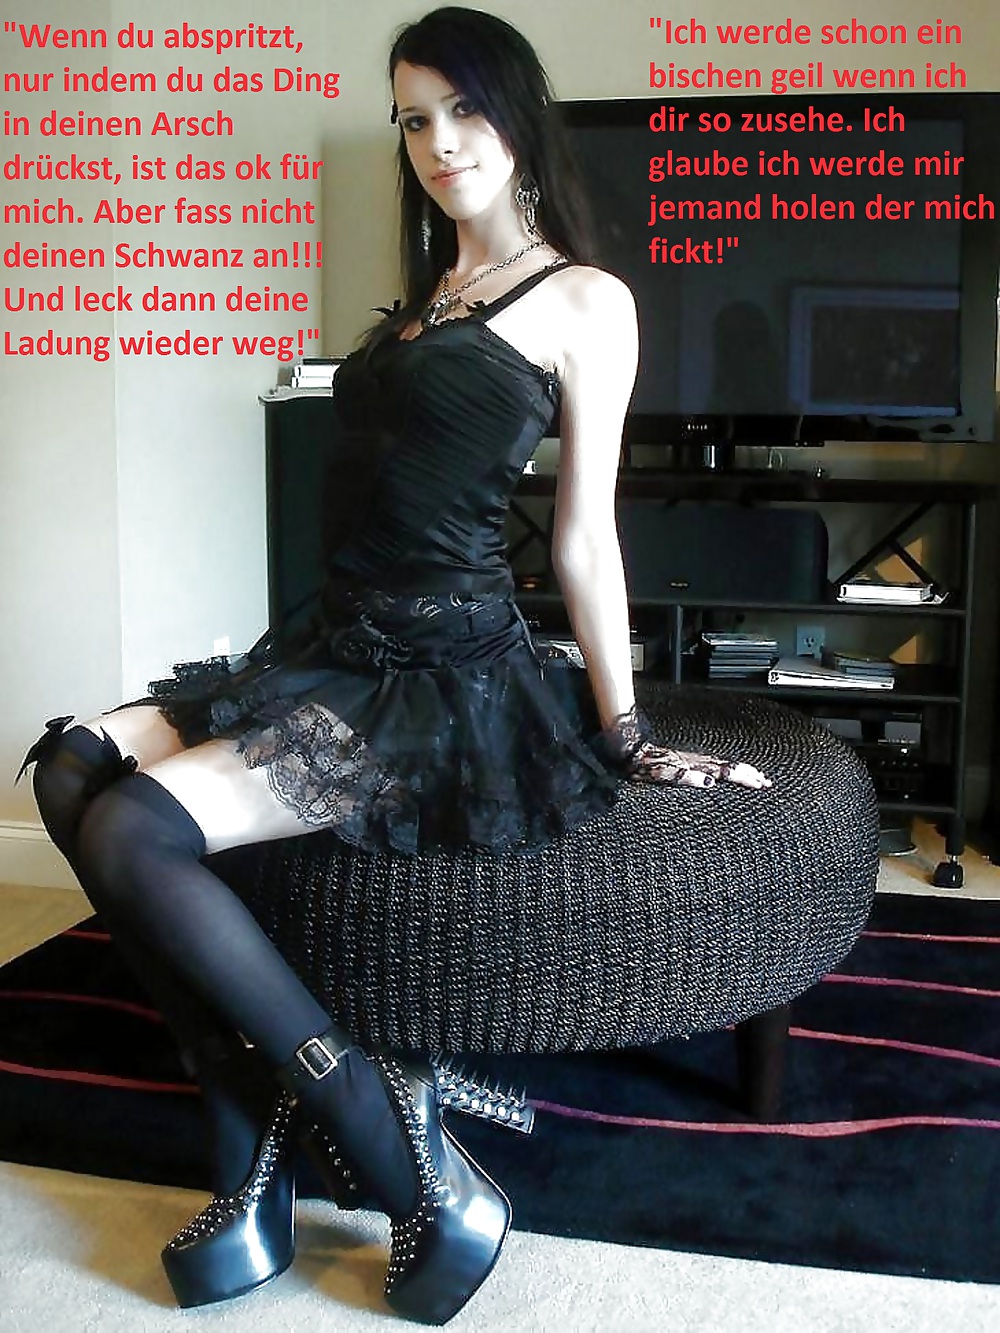 Femdom Cuckold Domination 6 Commentaires Allemands #14705019